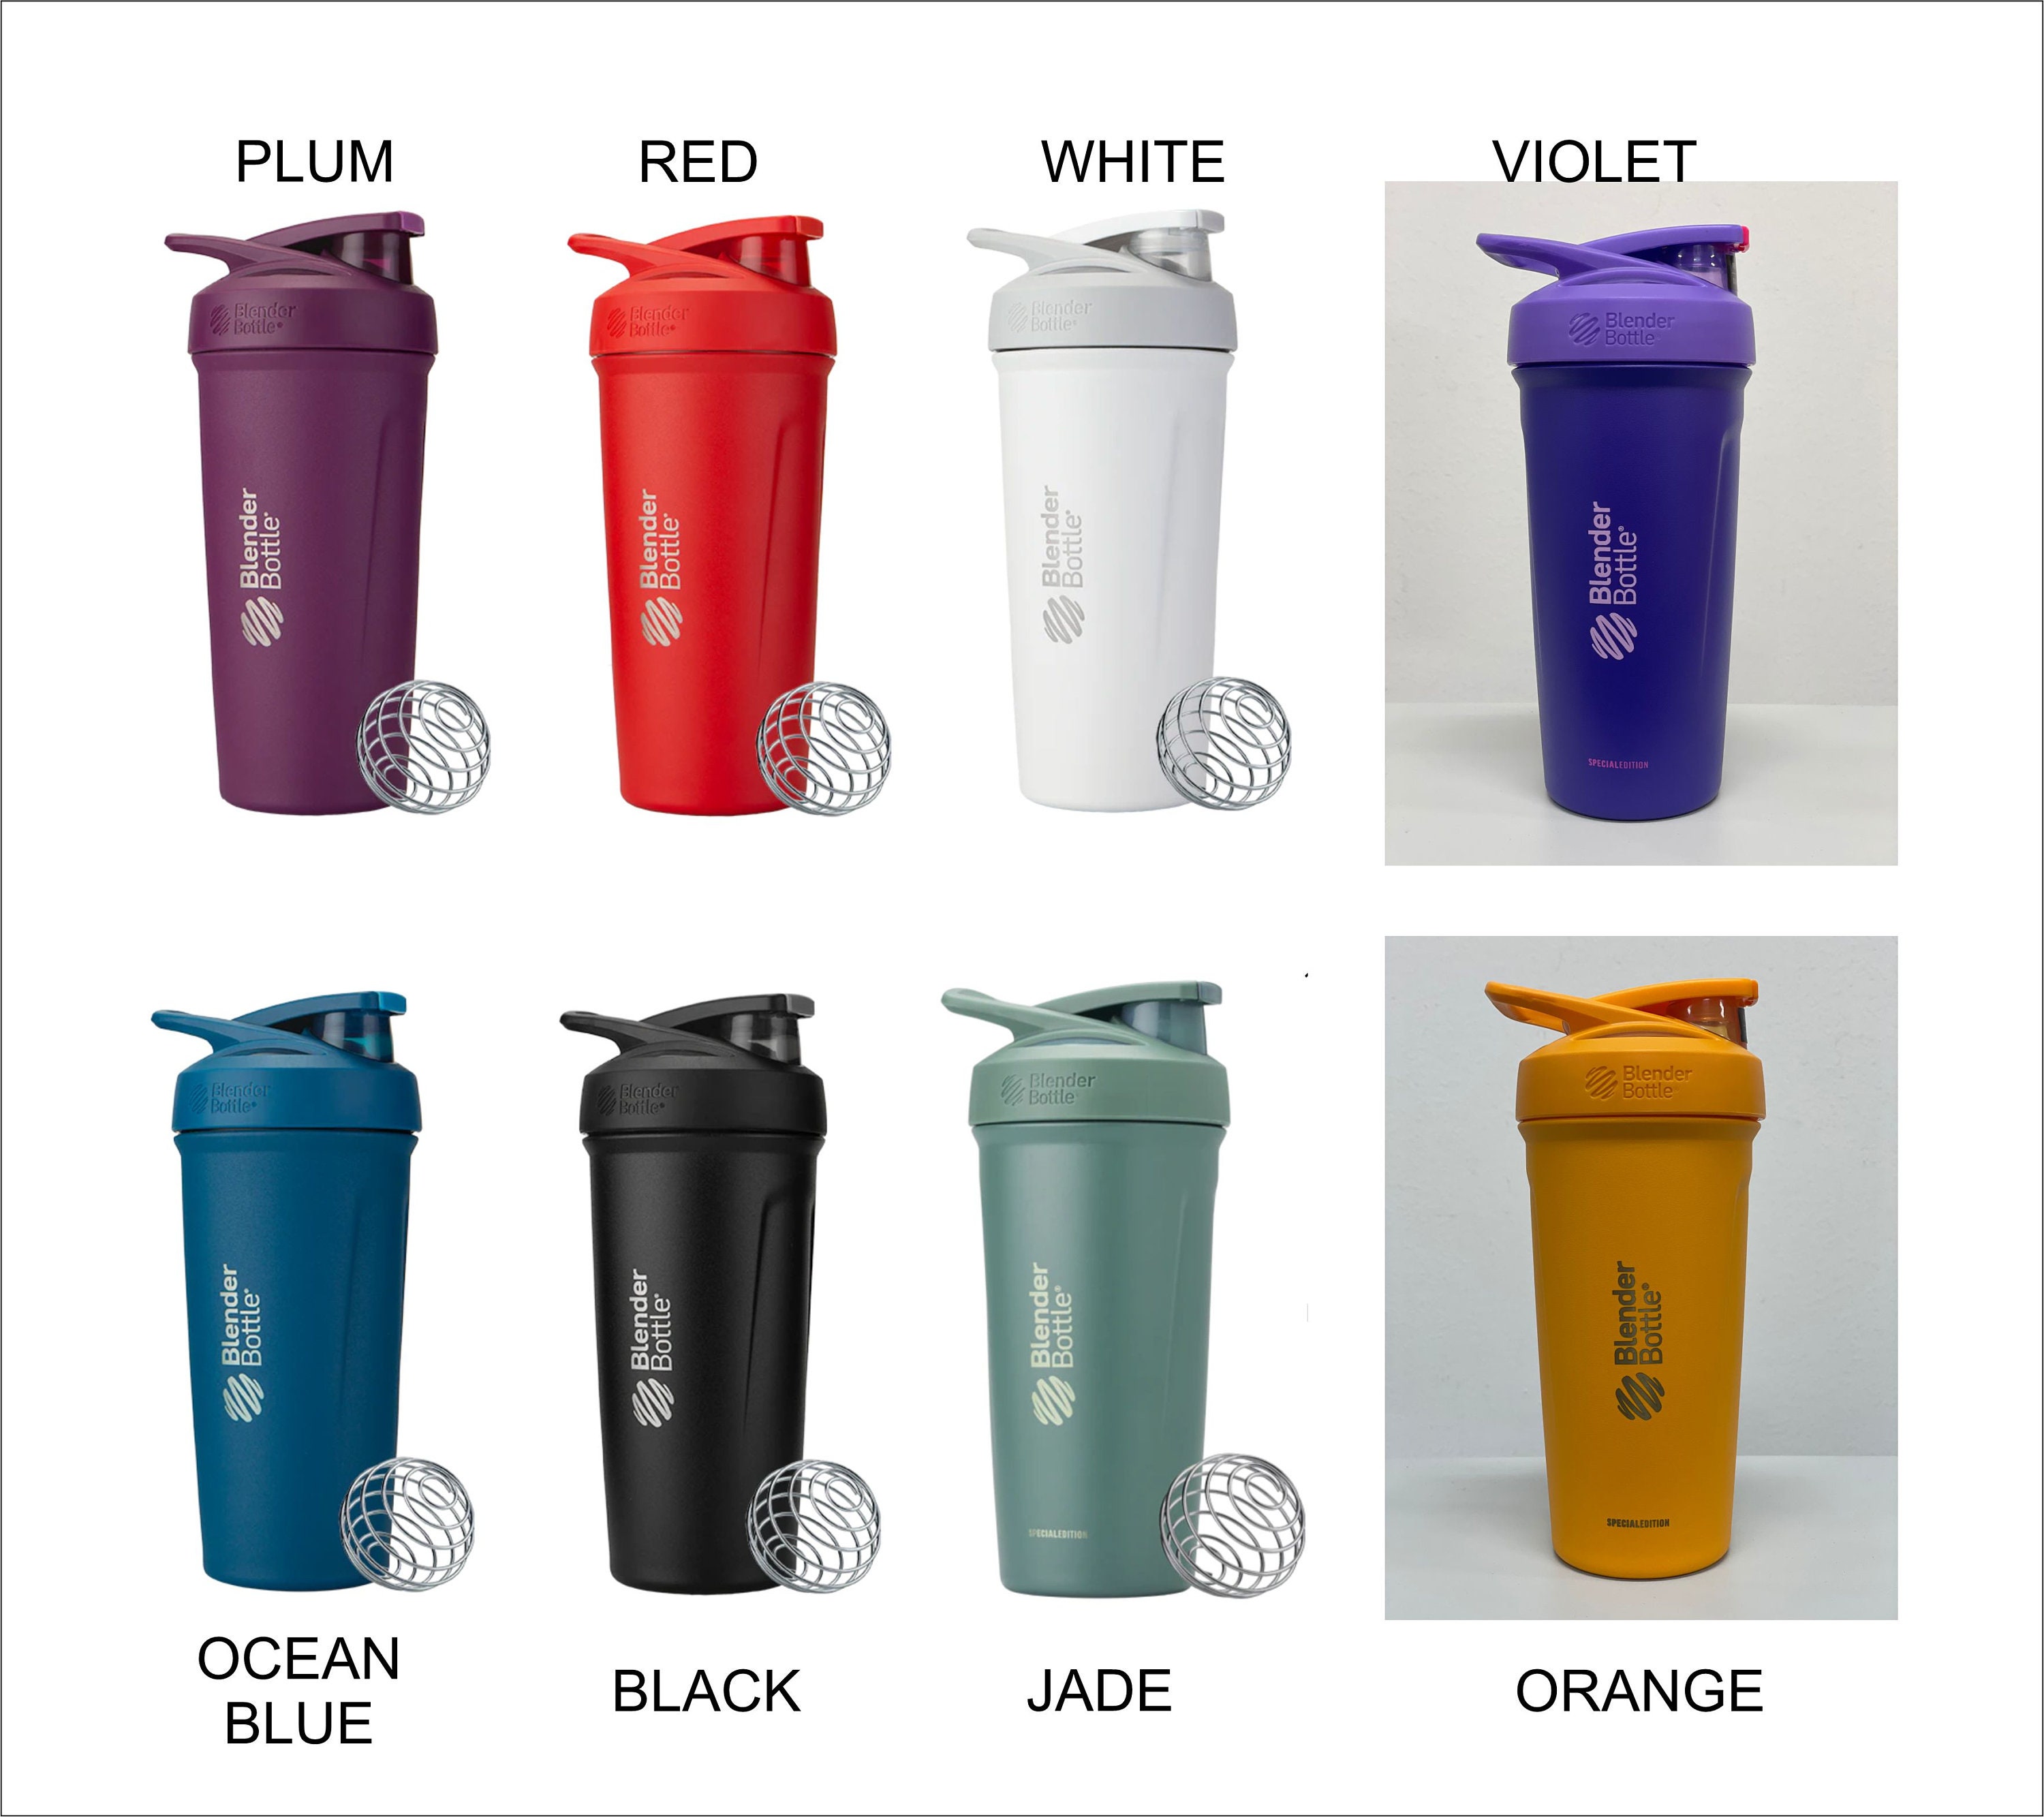 Blender Bottle Strada 24 oz. Shaker Cup New with Tags